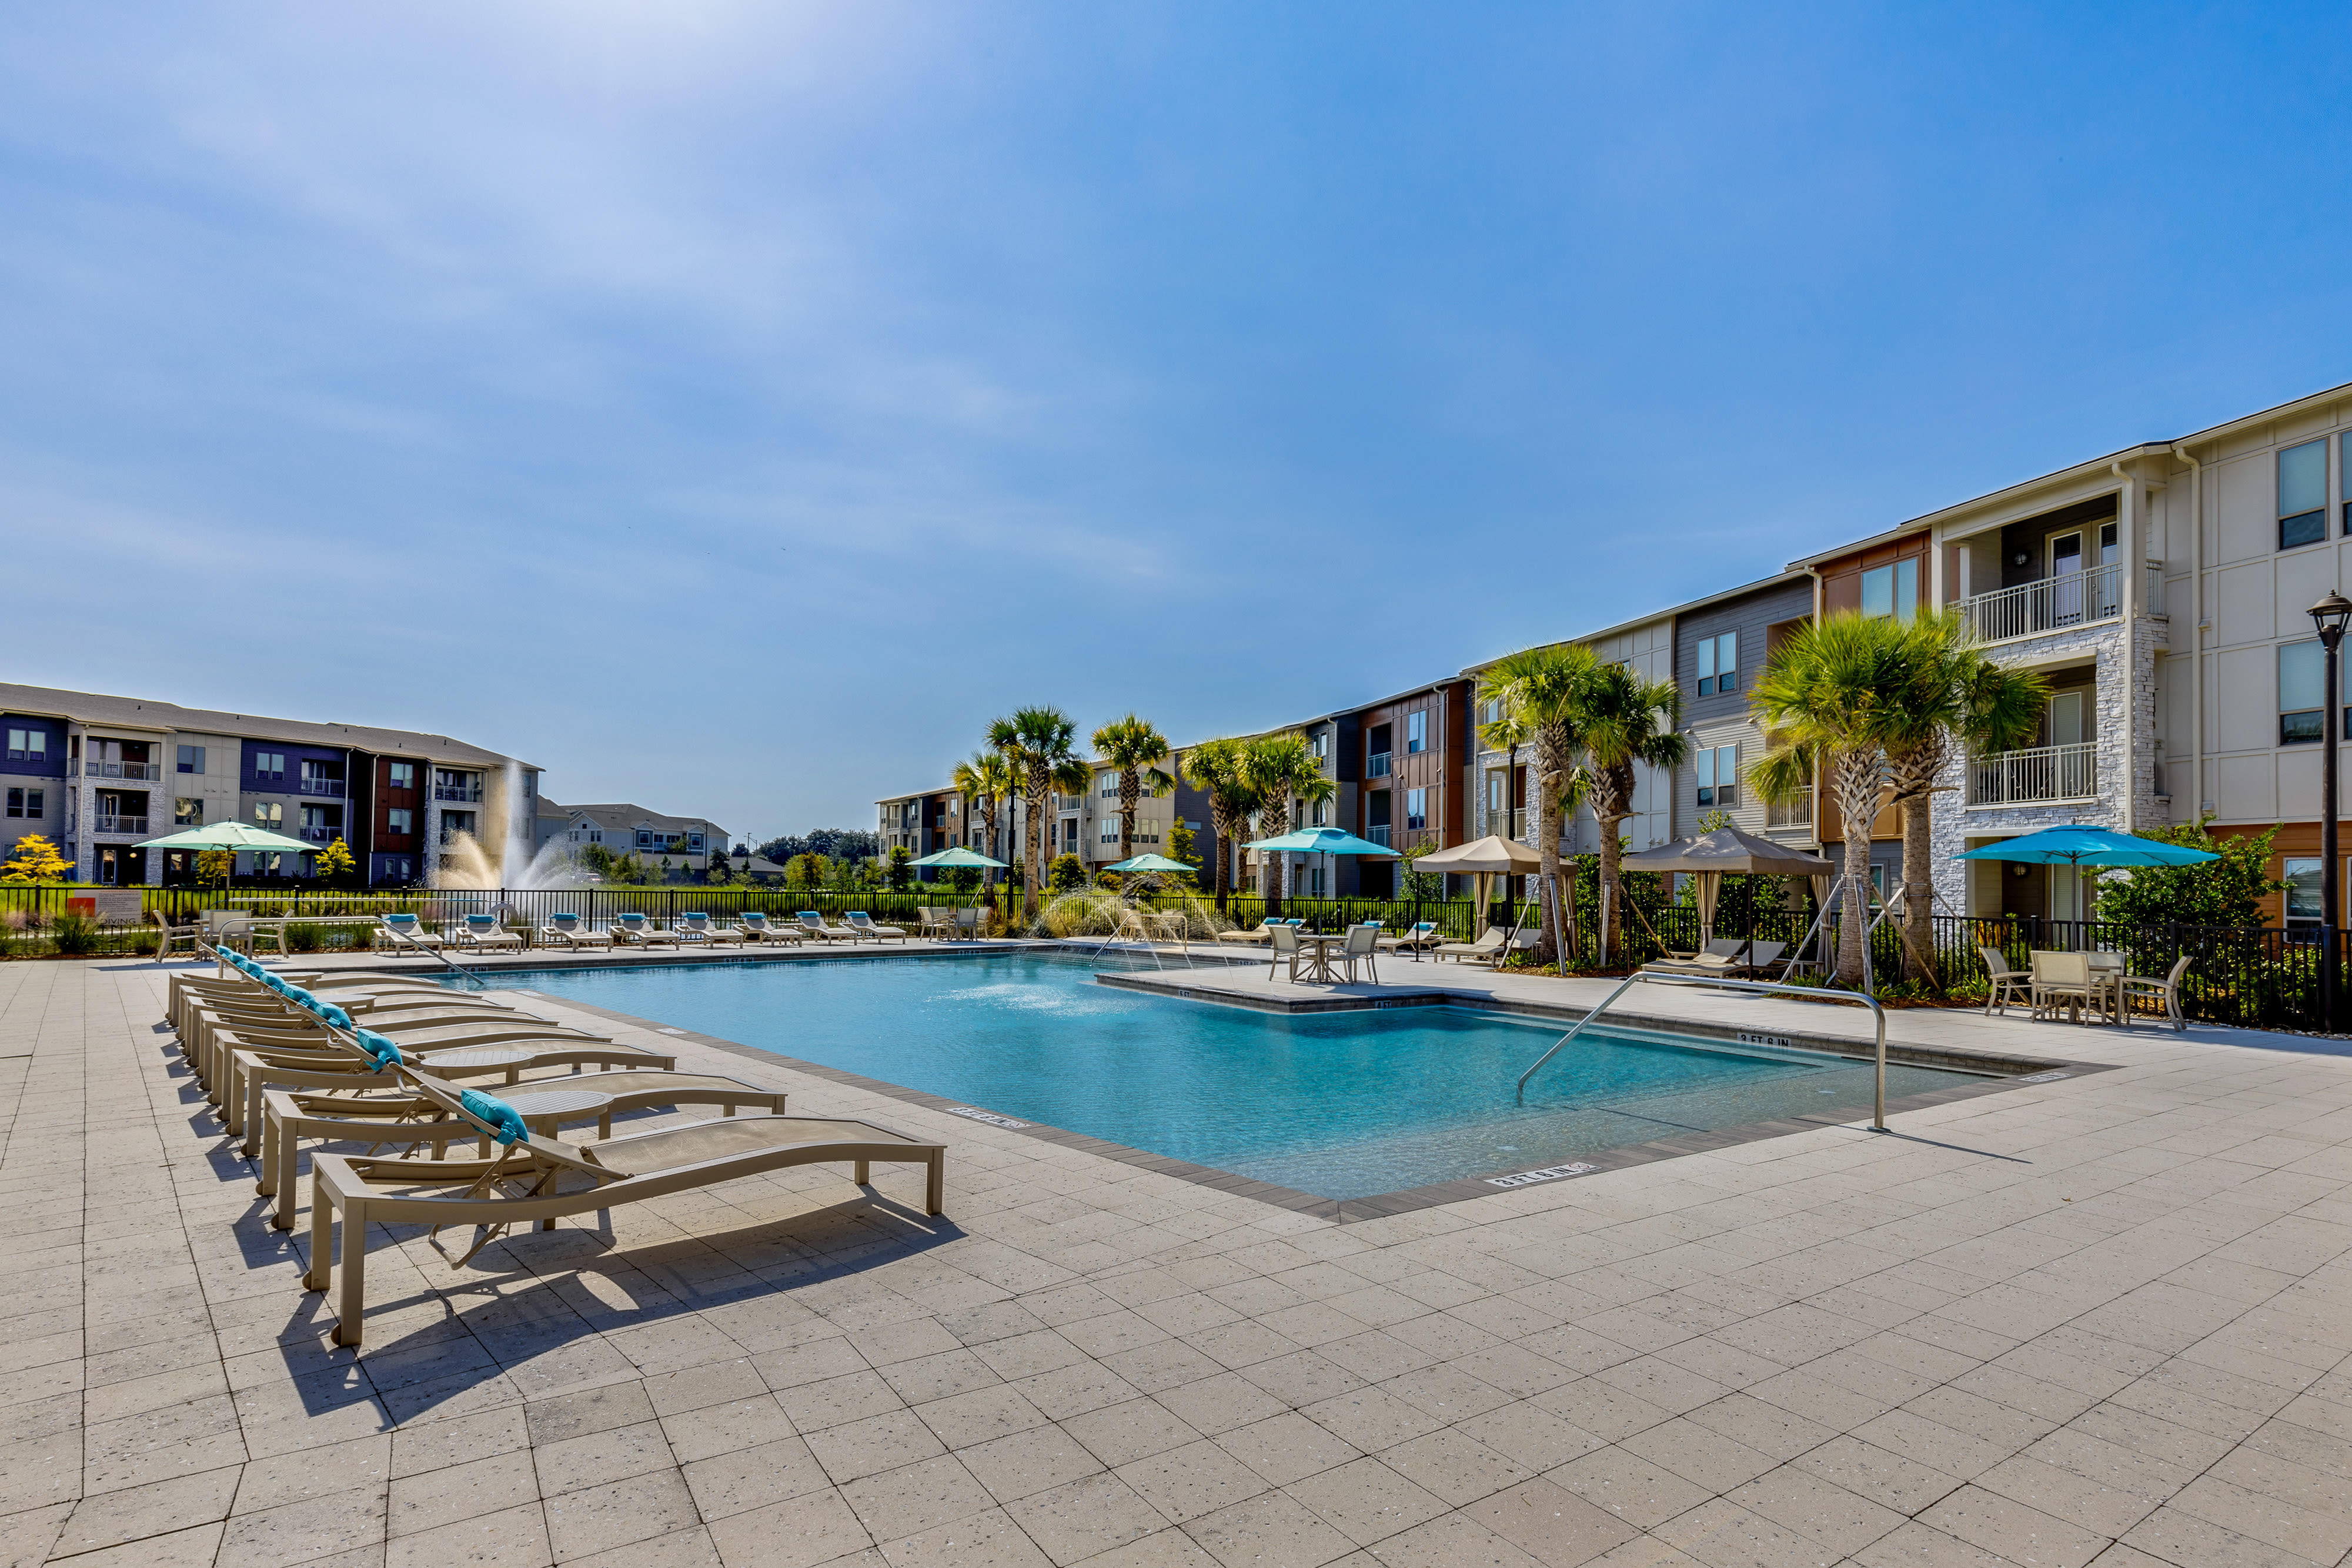 Resort-style swimming pool and poolside cabanas at The Point at Town Center in Jacksonville, Florida